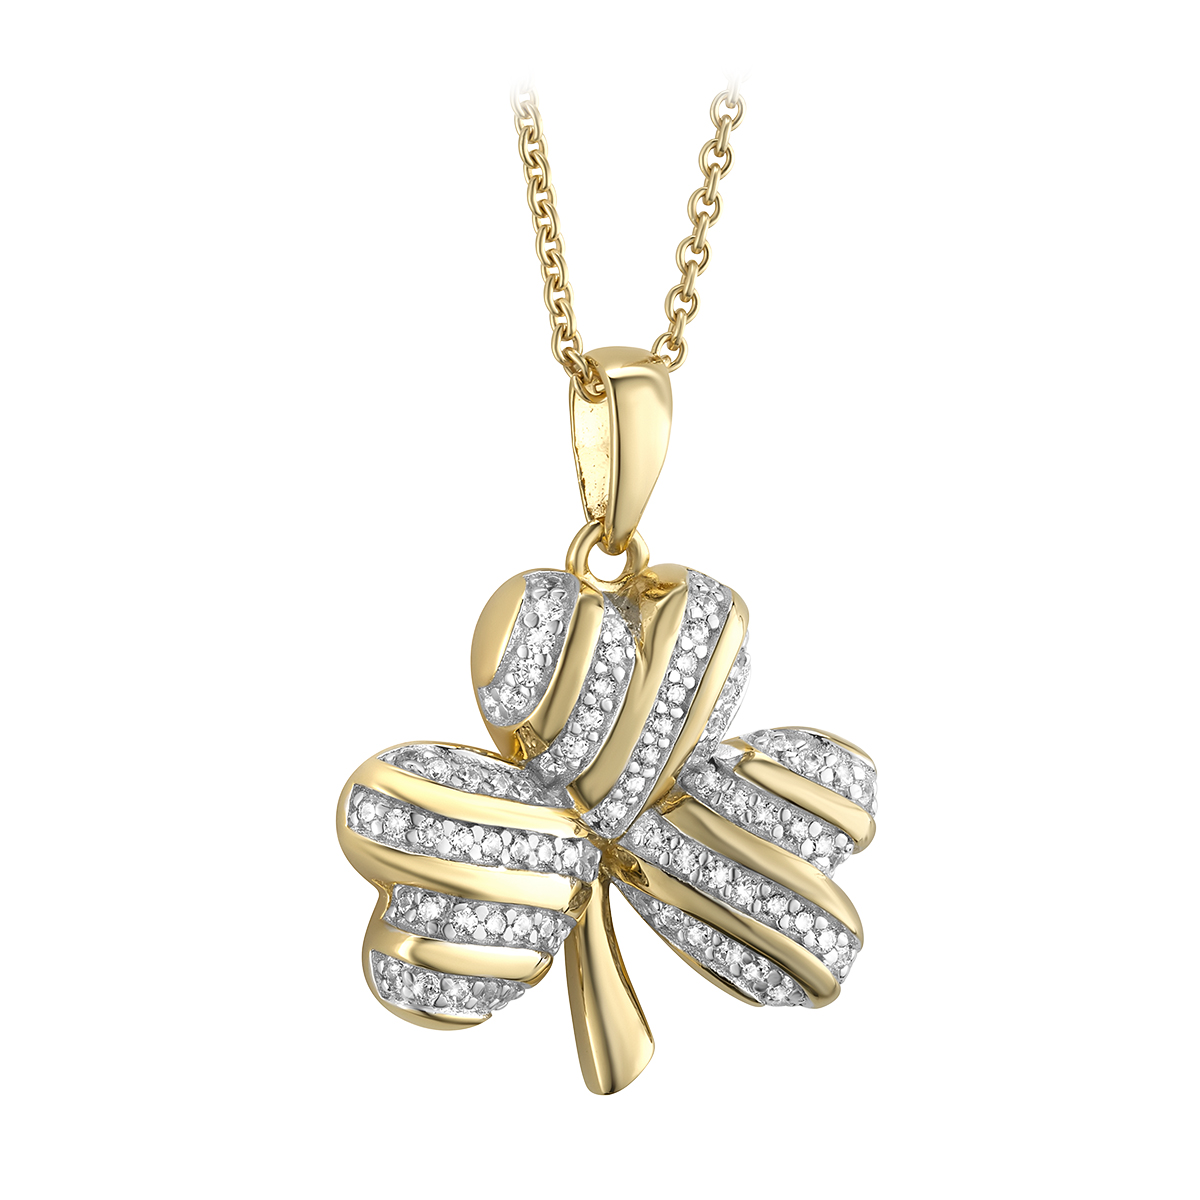 Product image for Irish Necklace | Vermeil Gold Overlay Sterling Silver Crystal Shamrock Pendant